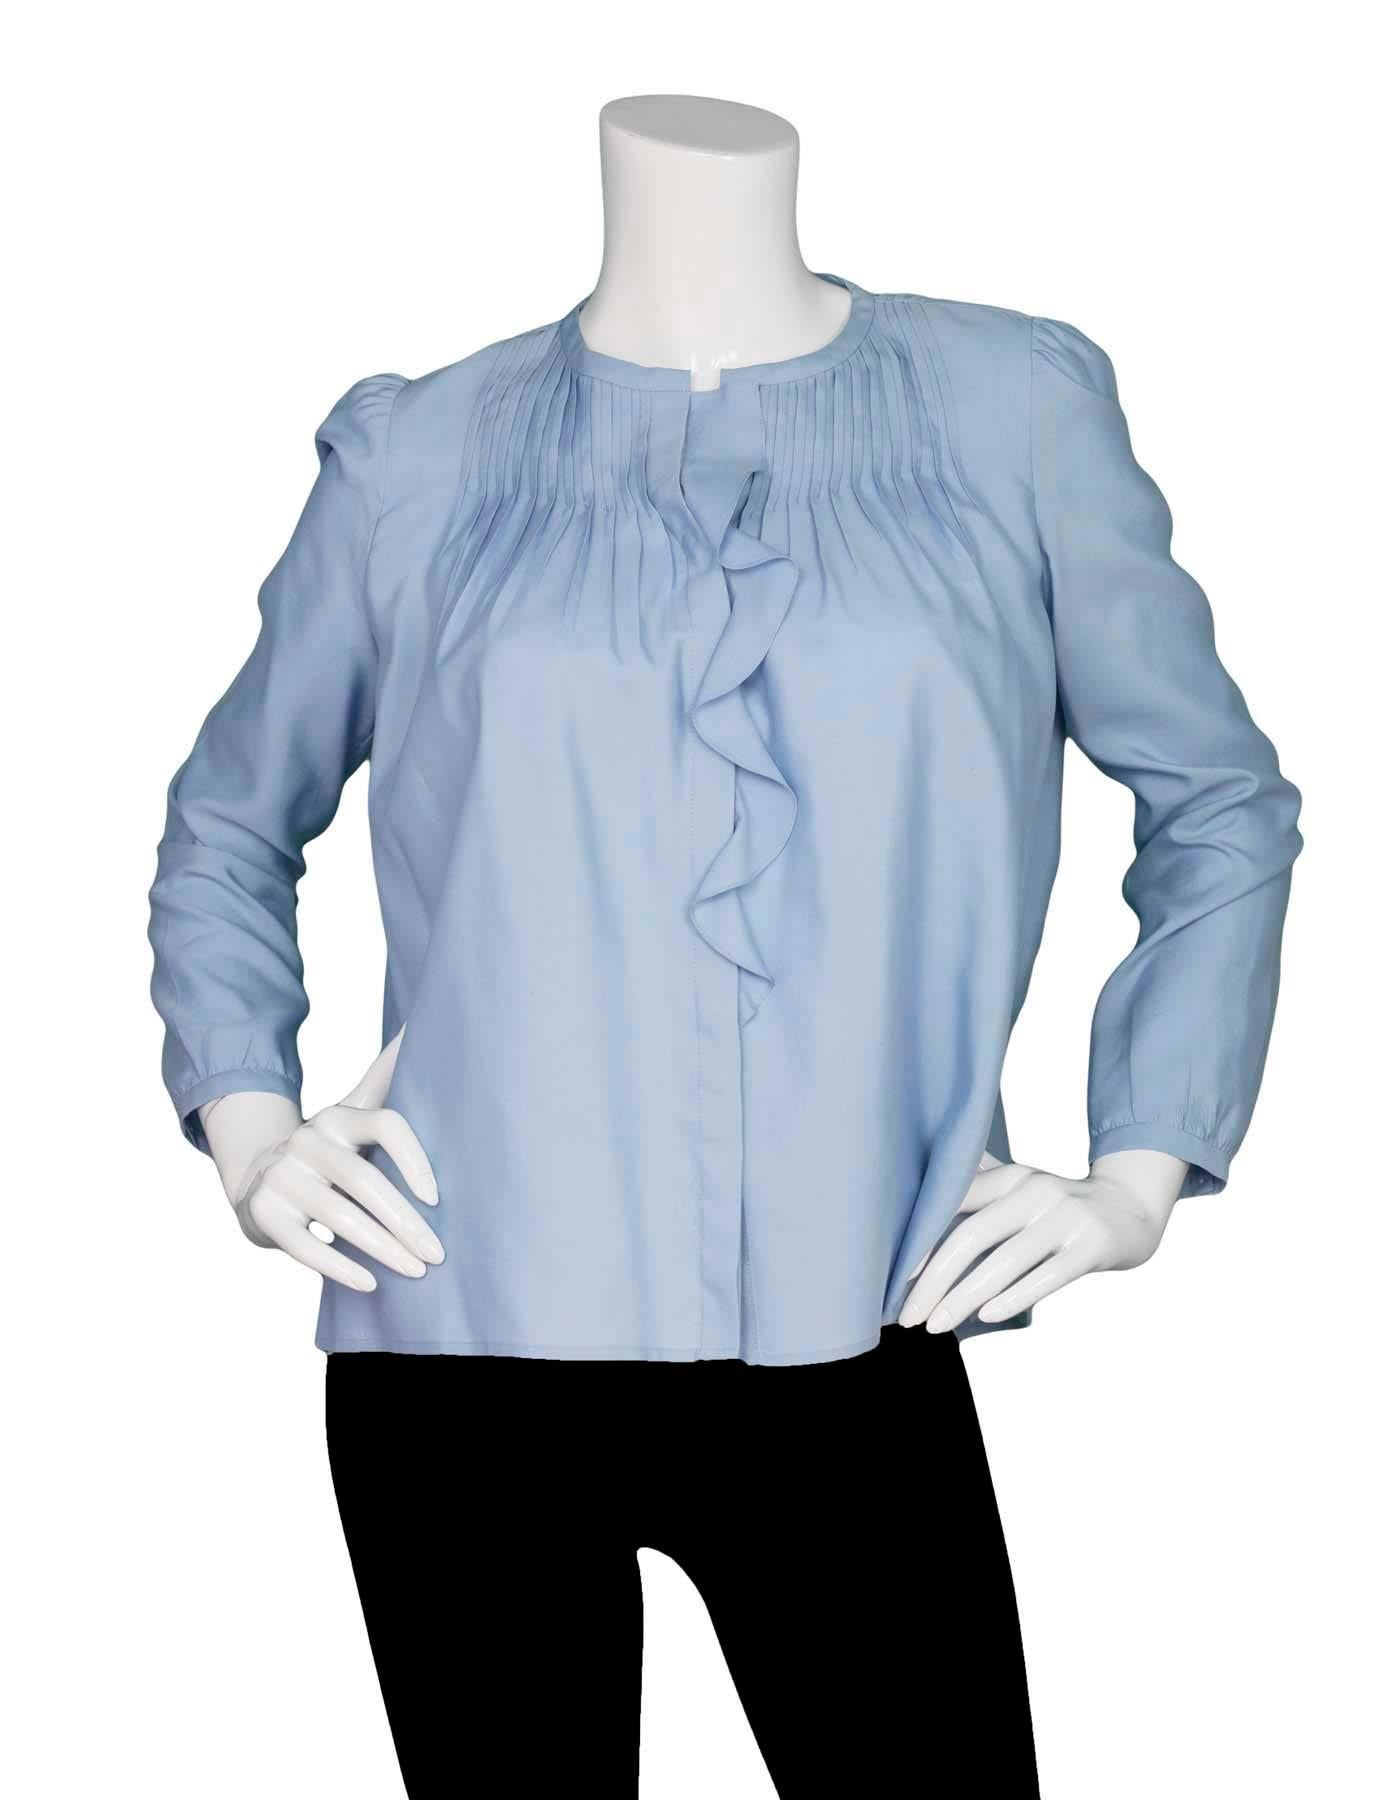 Isabel Marant Baby Blue Silk Pleated Blouse 
Features ruffles down front button opening and drawstring on interior back panel for optional fitted look

Made In: Romania
Color: Baby blue
Composition: 100% silk
Lining: None
Closure/Opening: Button